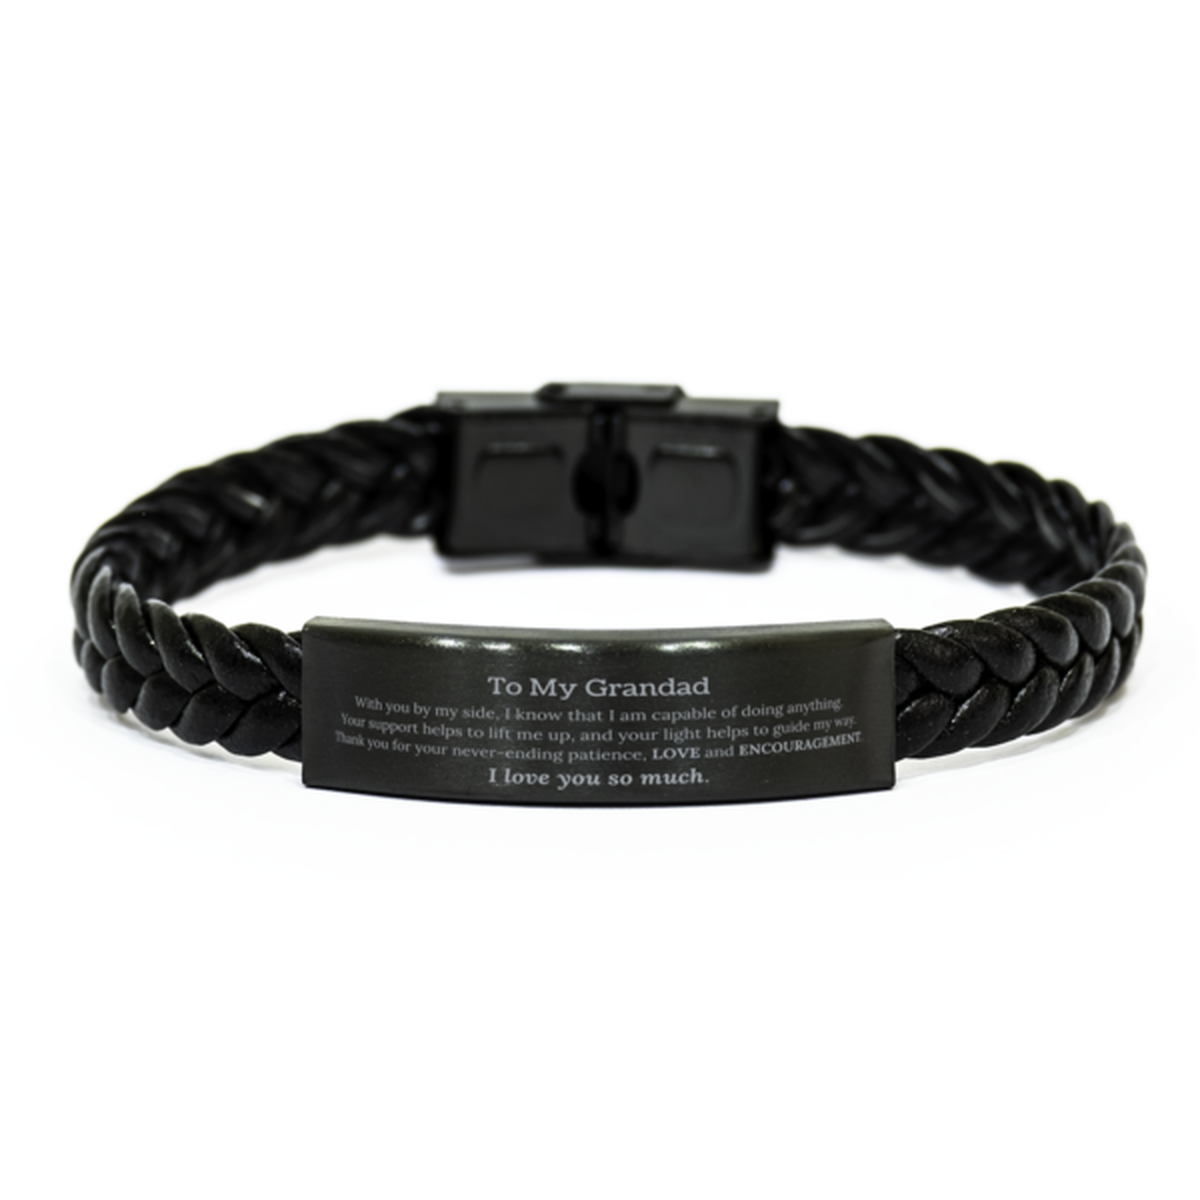 Appreciation Grandad Braided Leather Bracelet Gifts, To My Grandad Birthday Christmas Wedding Keepsake Gifts for Grandad With you by my side, I know that I am capable of doing anything. I love you so much